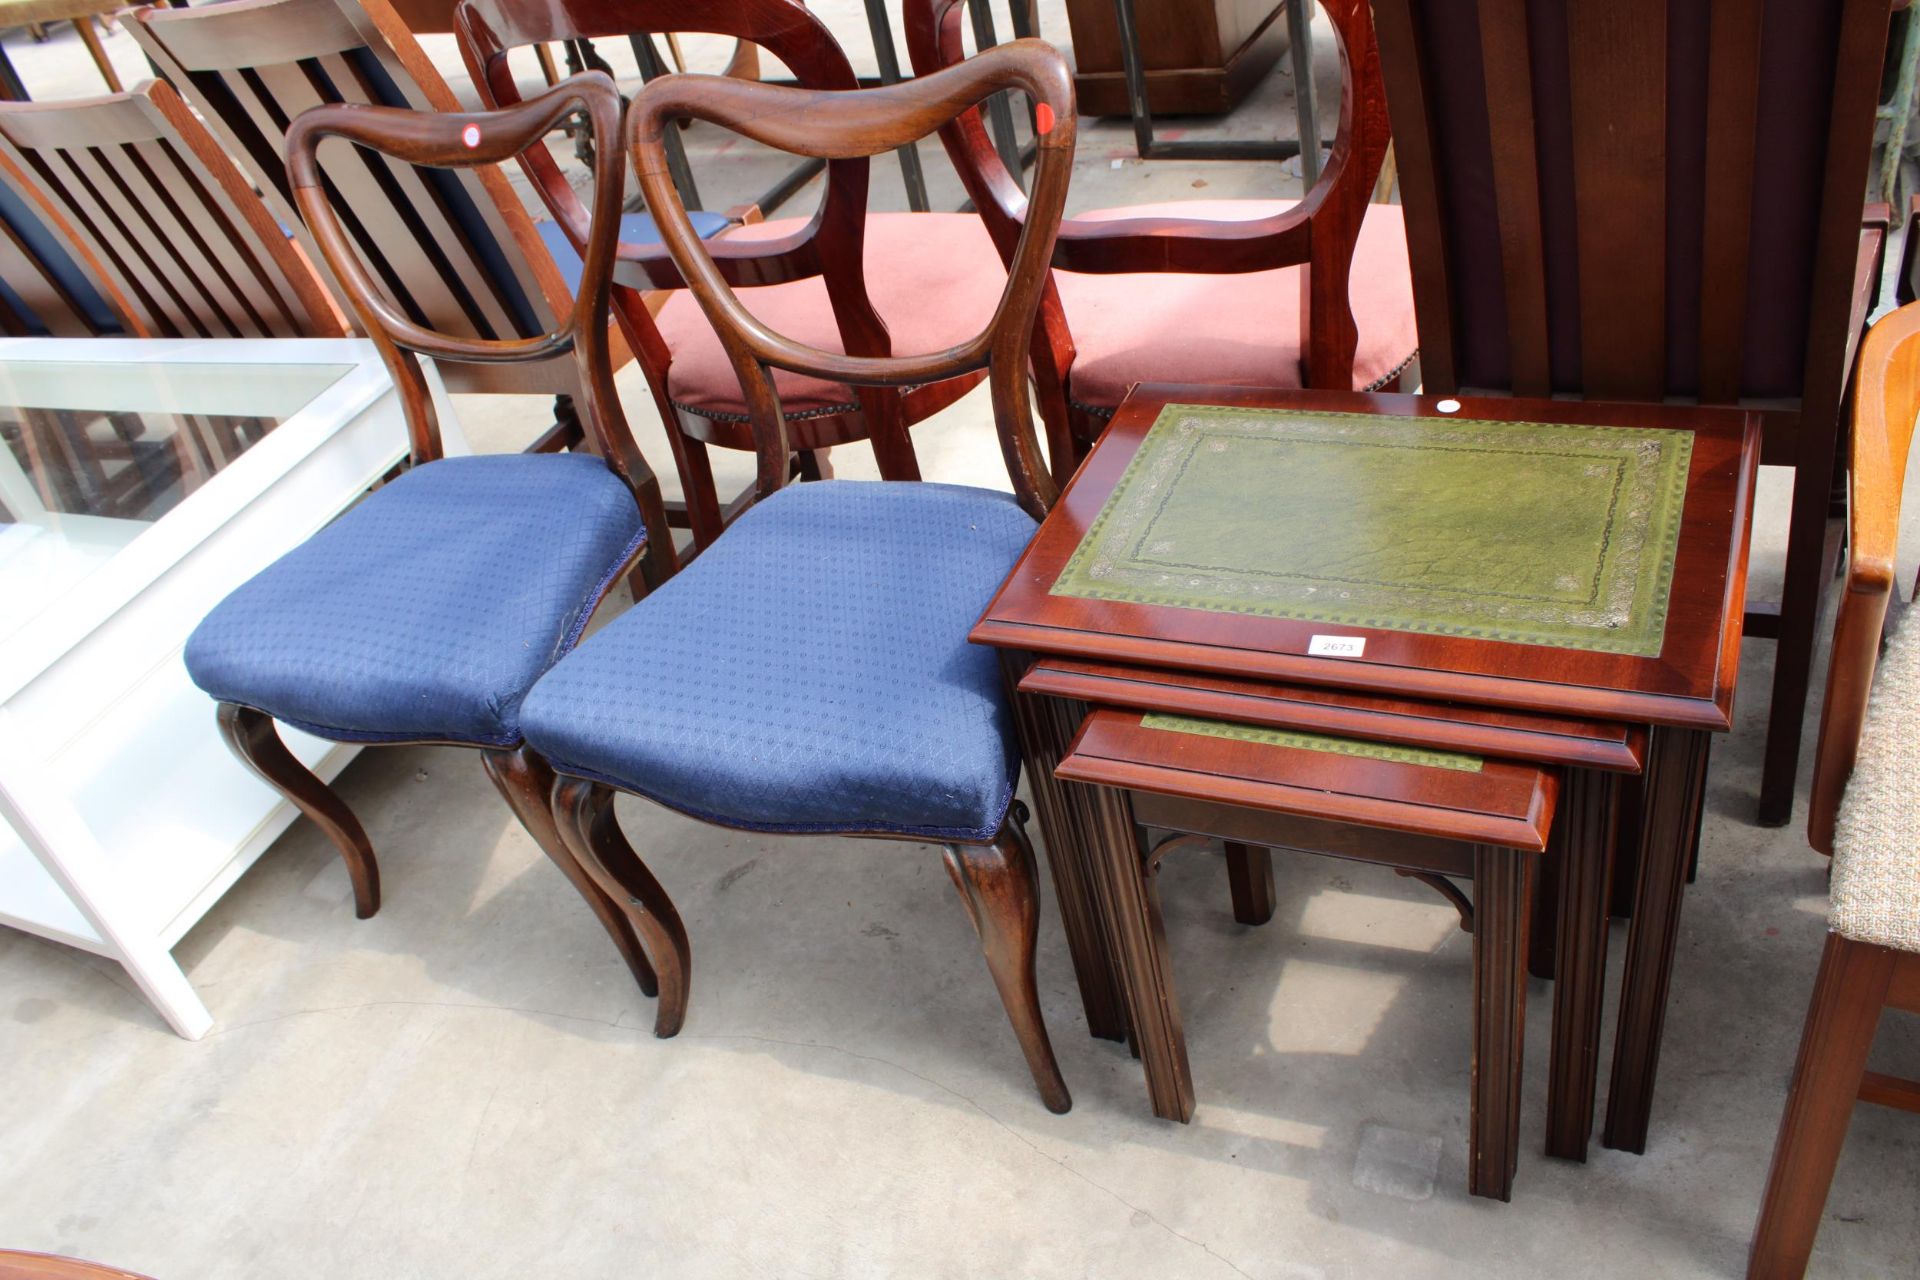 A NEST OF THREE MAHOGANY TABLES WITH INSET LEATHER TOPS AND A PAIR OF VICTORIAN PARLOUR CHAIRS